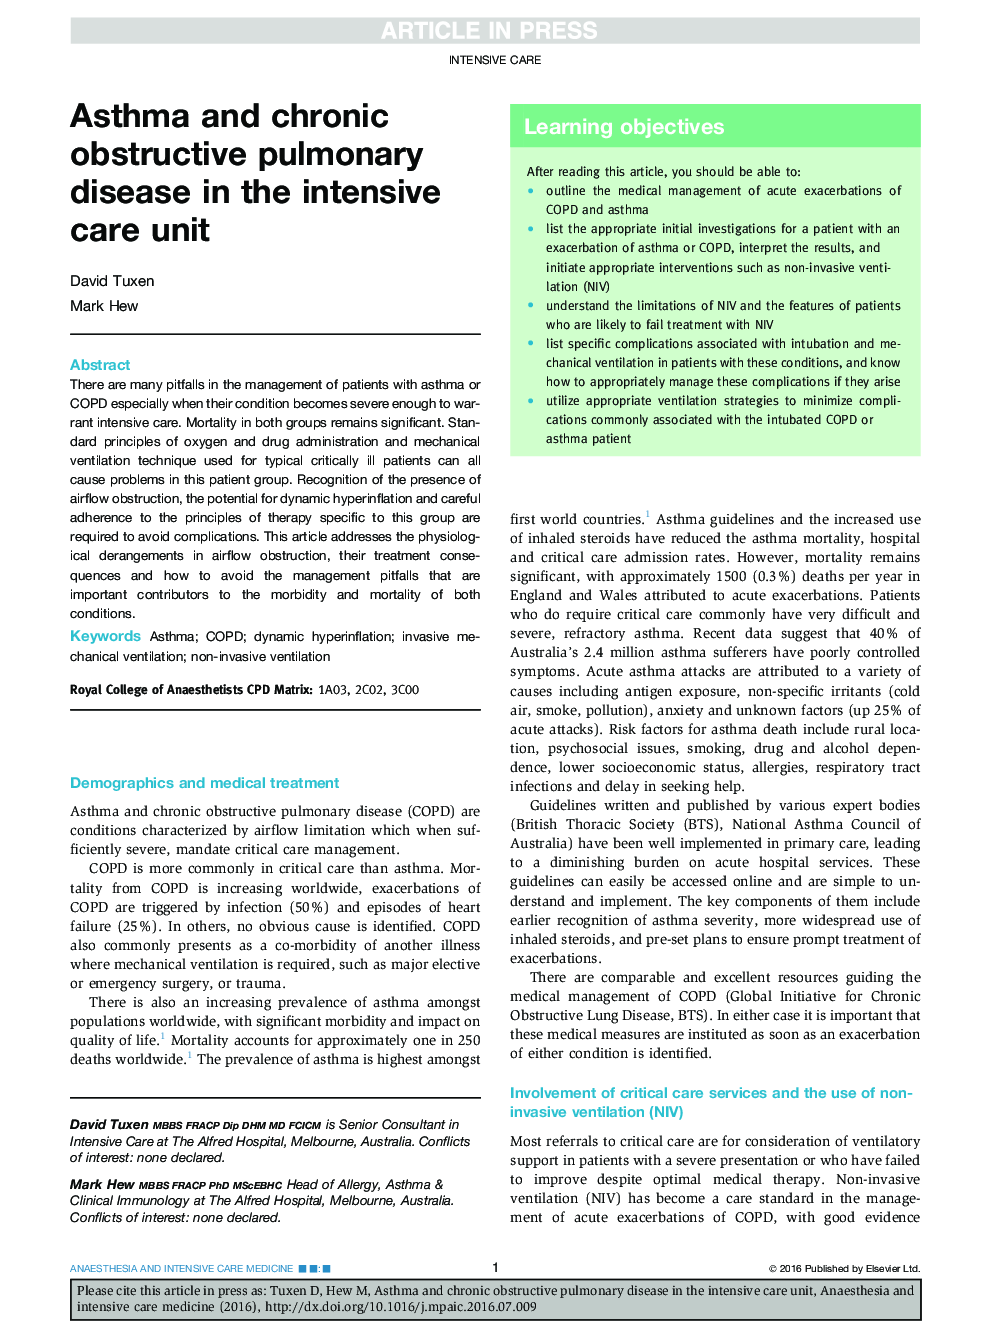 Asthma and chronic obstructive pulmonary disease in the intensive care unit